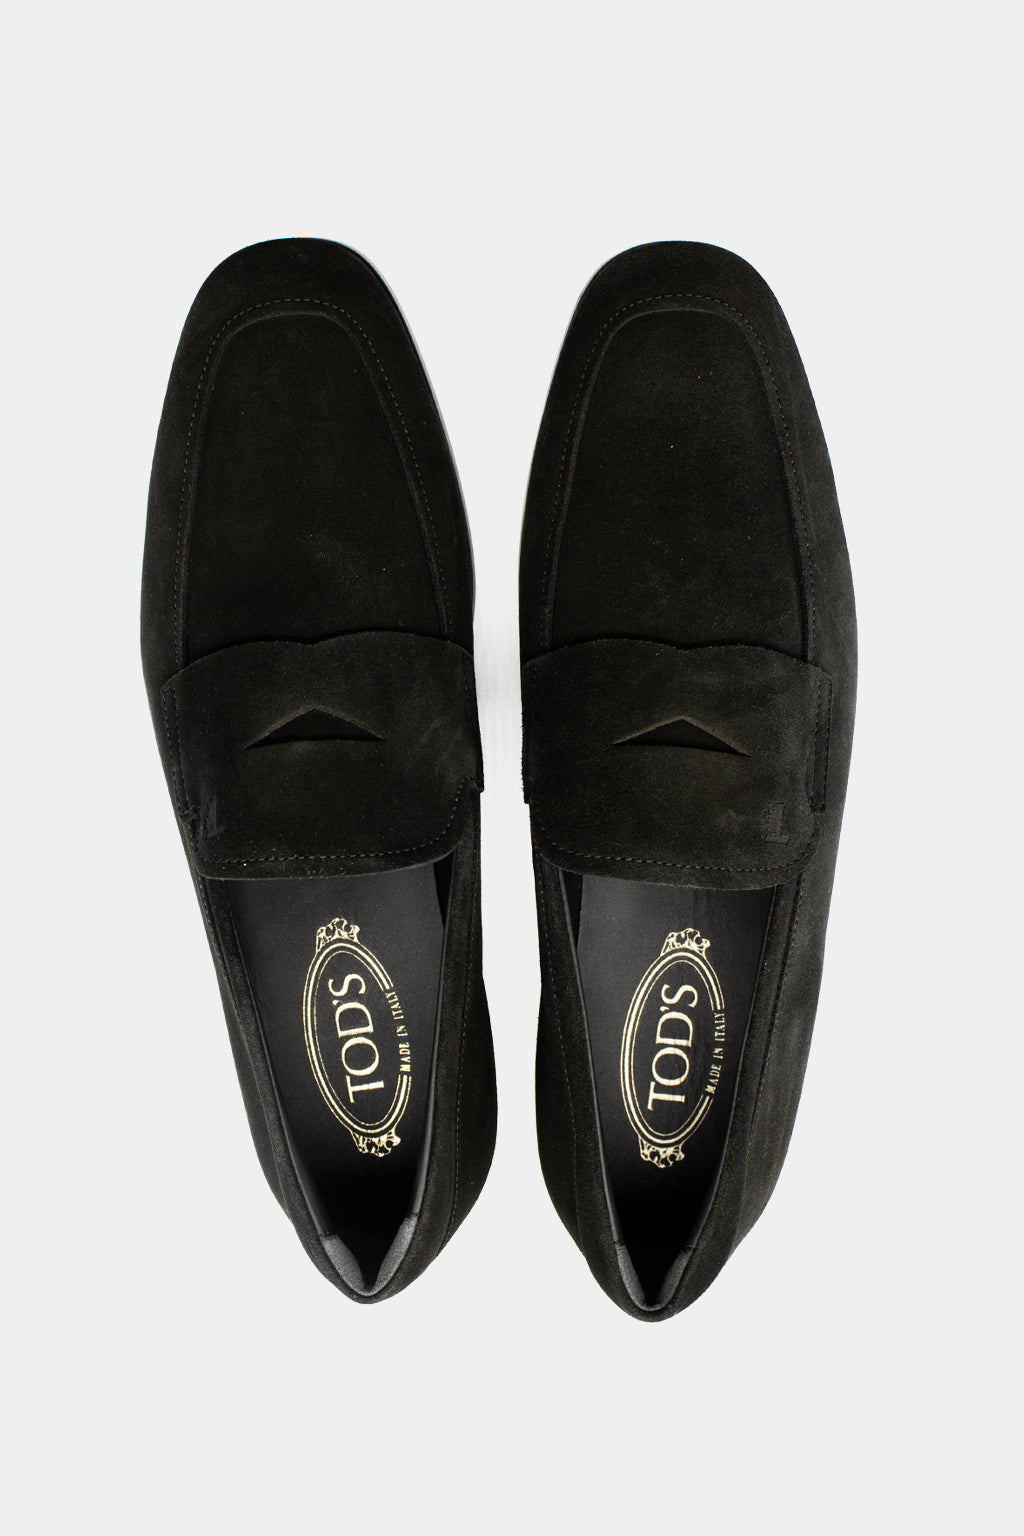 Tod's - Loafer Mocassino Cuoio 46B